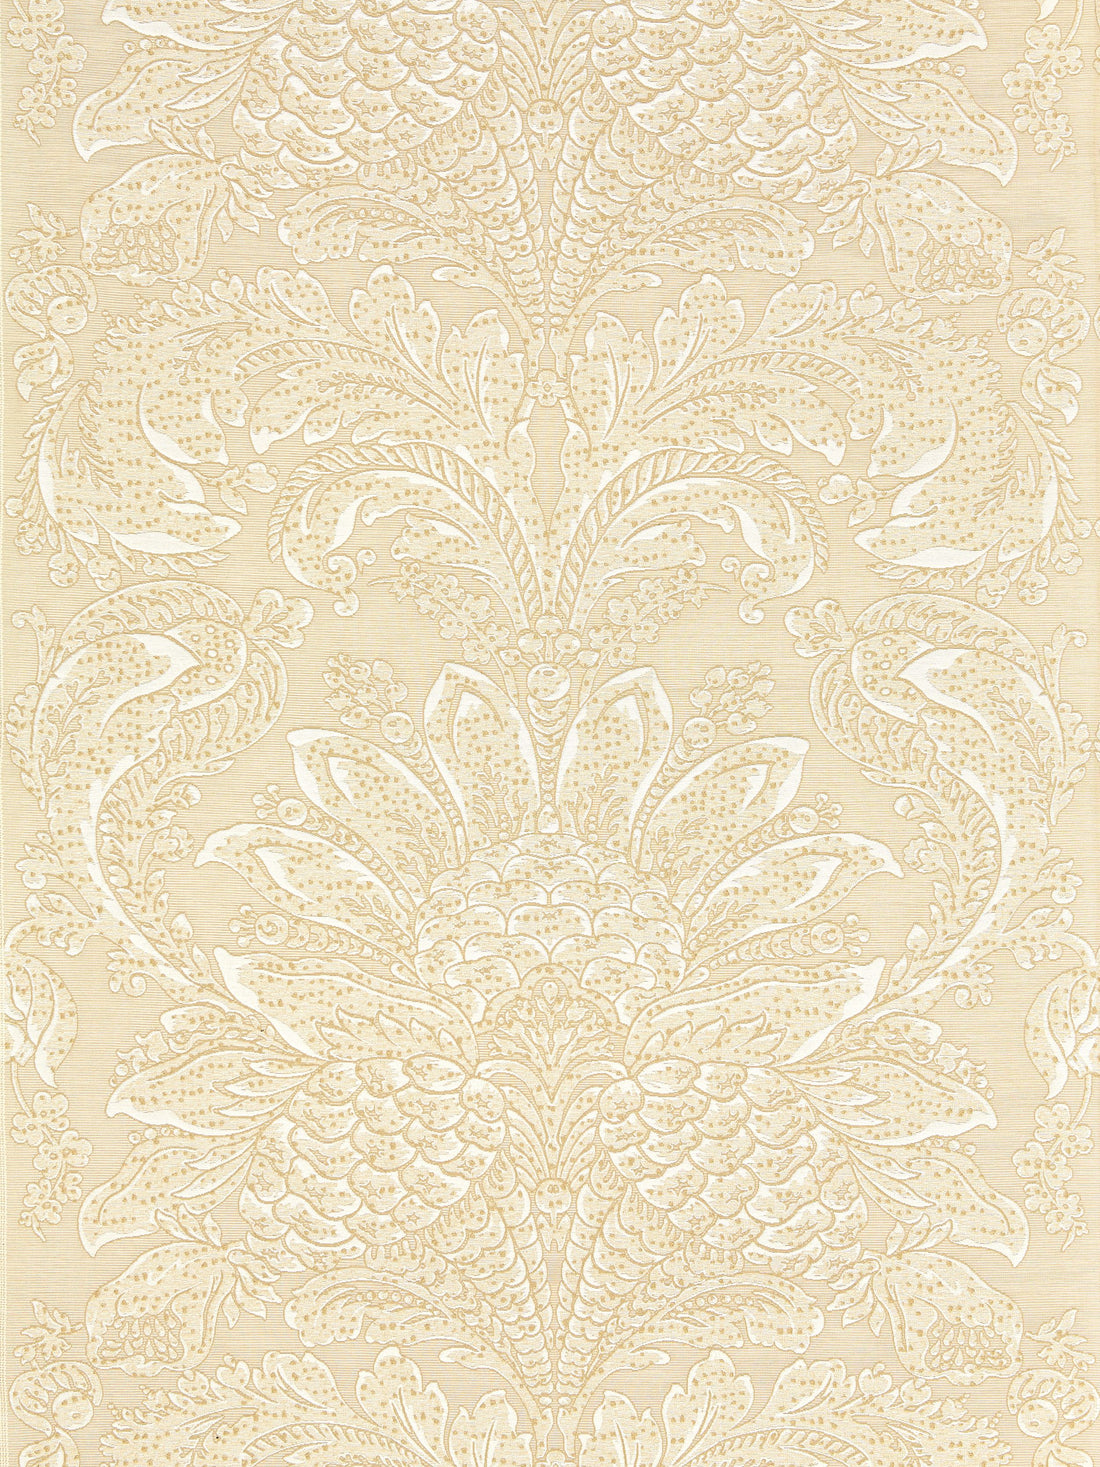 Carlotta Damask fabric in bisque color - pattern number SC 000127081 - by Scalamandre in the Scalamandre Fabrics Book 1 collection